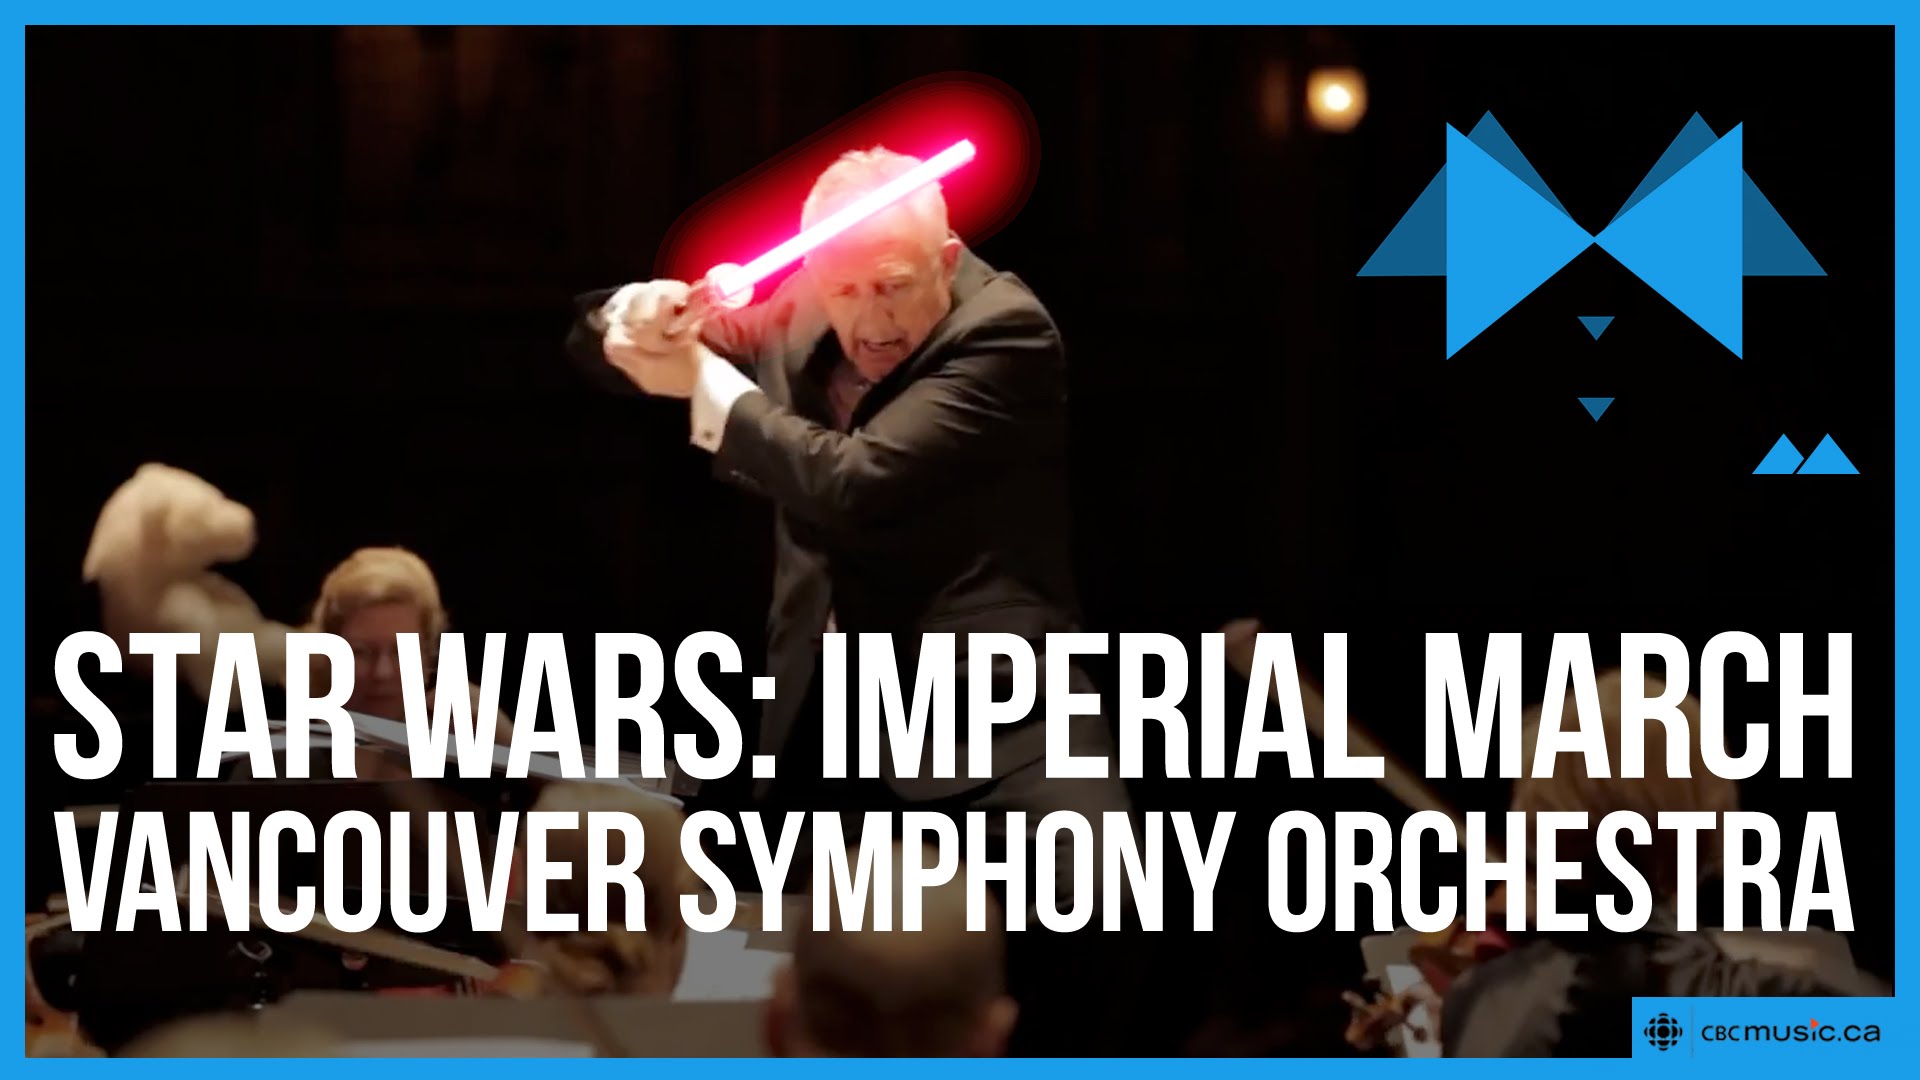 Imperial March Orchestra (Darth Vader's Theme) from Star Wars by John Williams 1